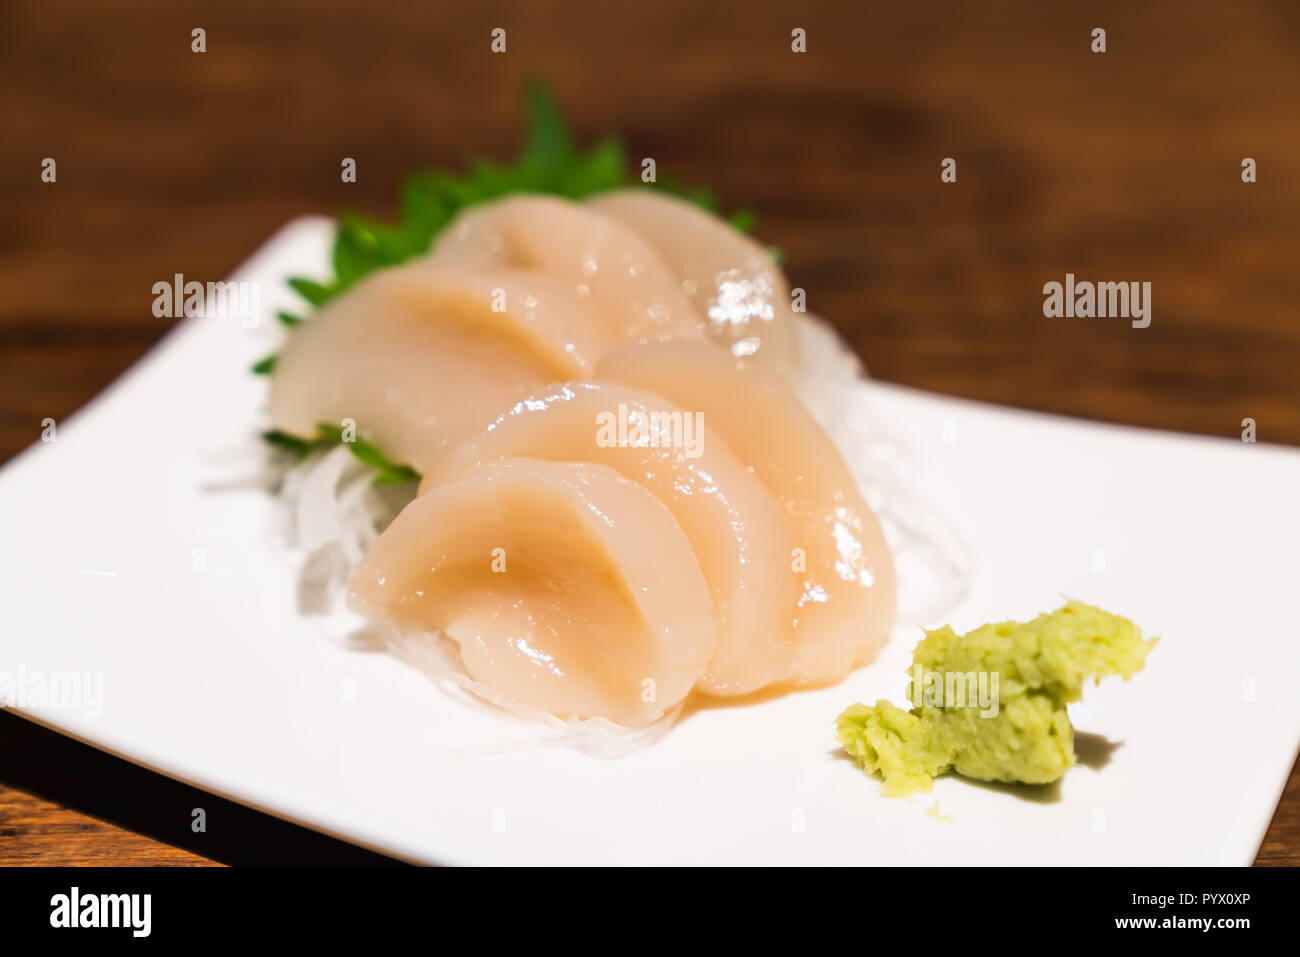 Raw scallop sashimi or hotate sashimi served with wasabi on dish, Japanese famous delicious raw seafood meal. Asian food, Japan traditional menu Stock Photo